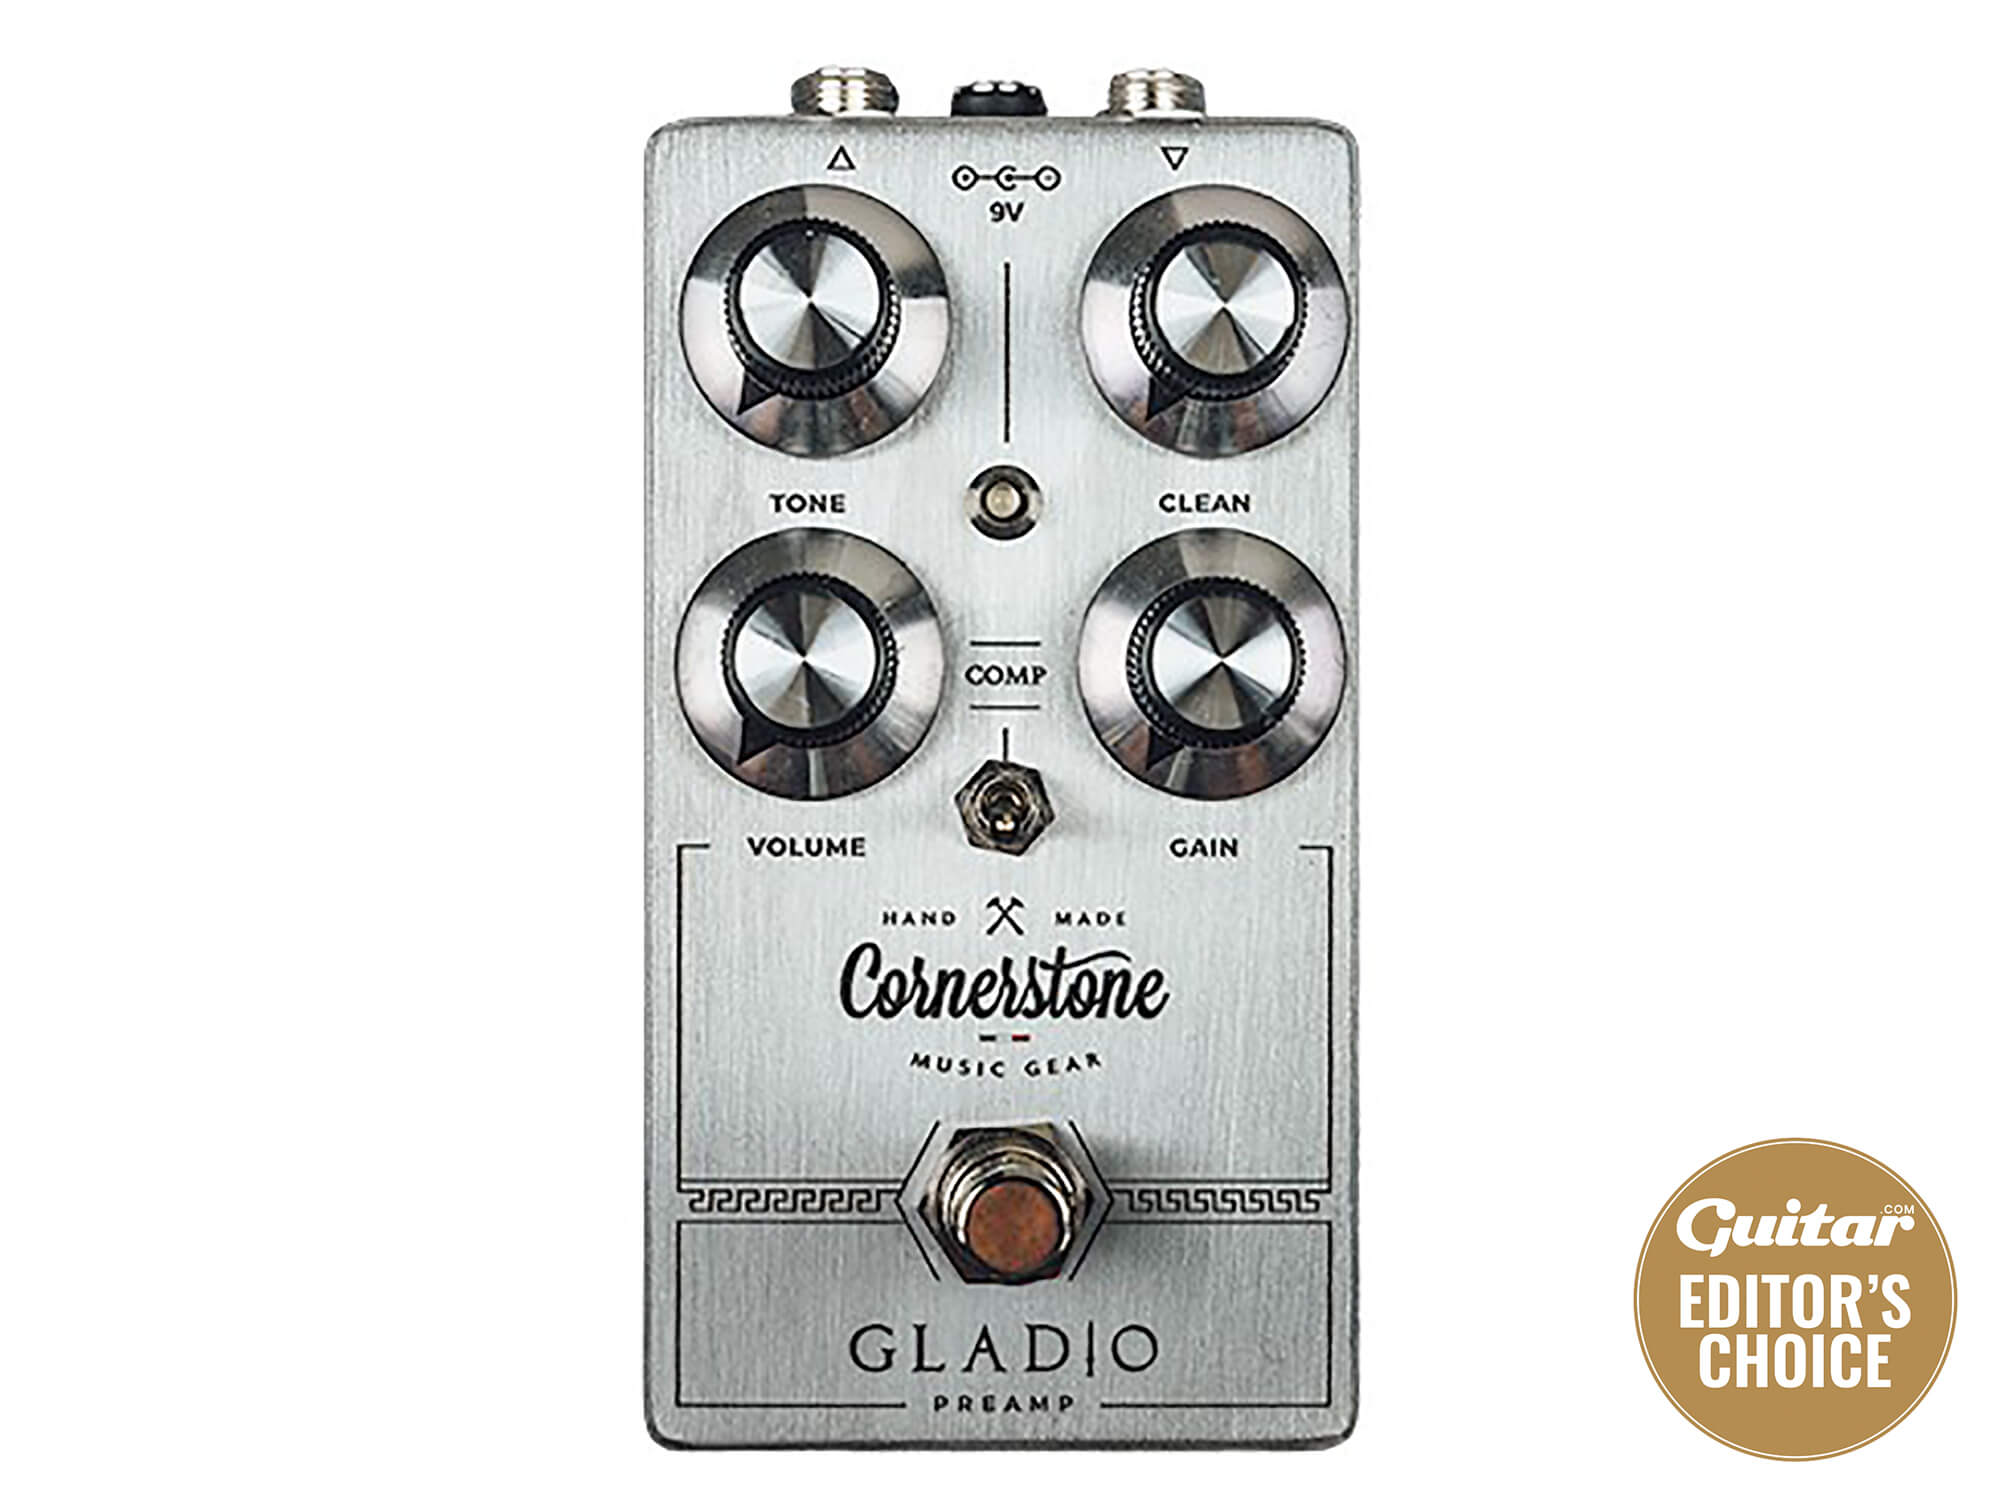 Cornerstone Gladio SC review: The most pedalboard-friendly Dumble